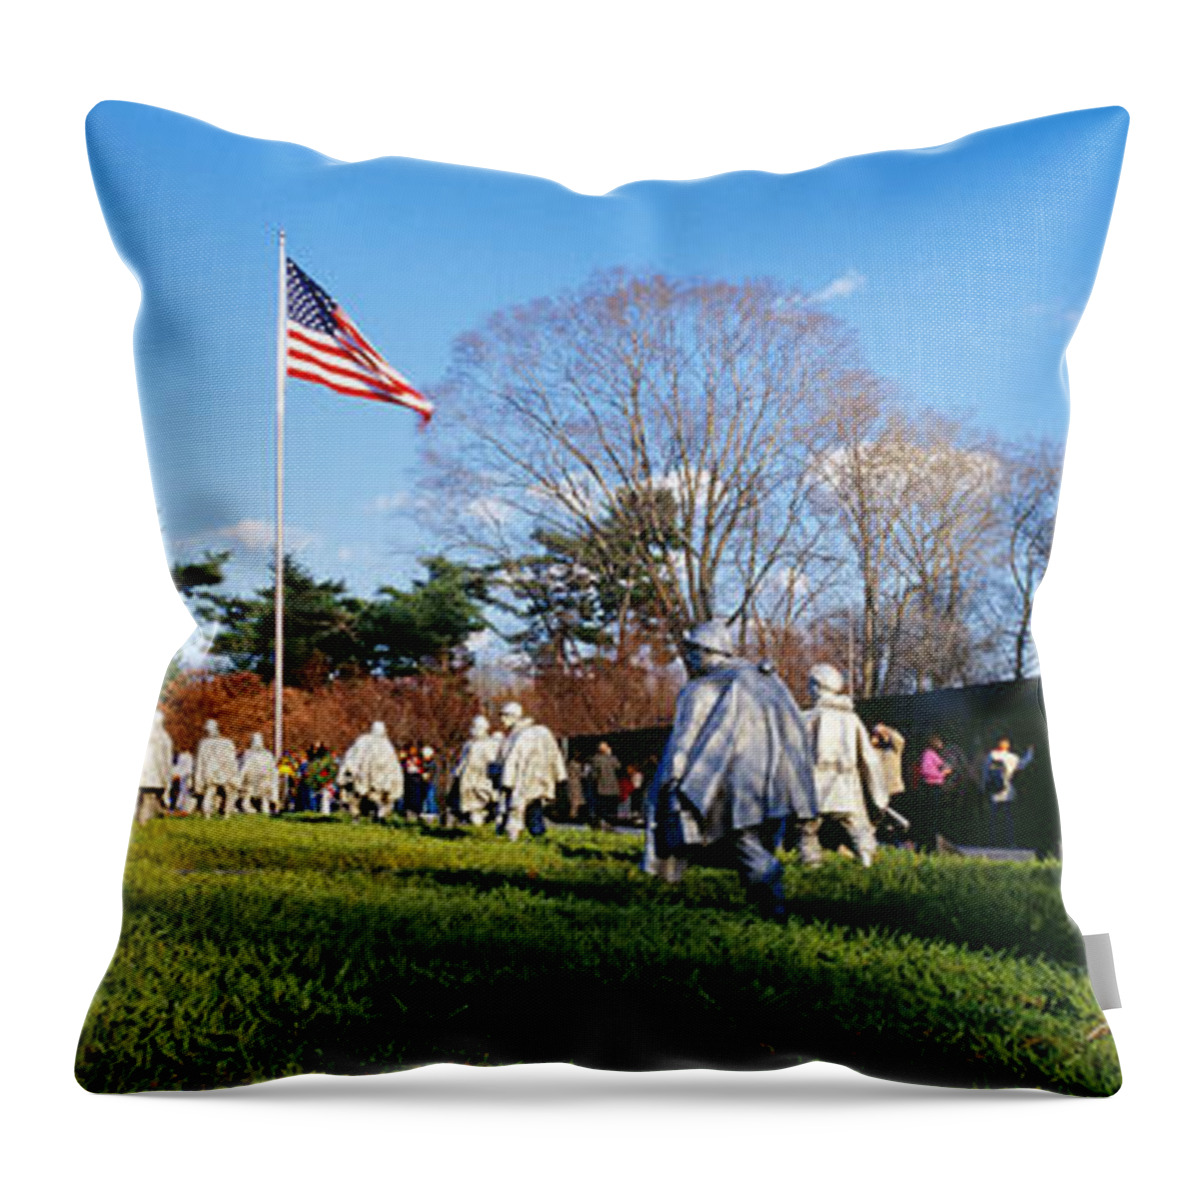 Photography Throw Pillow featuring the photograph Korean Veterans Memorial Washington Dc by Panoramic Images